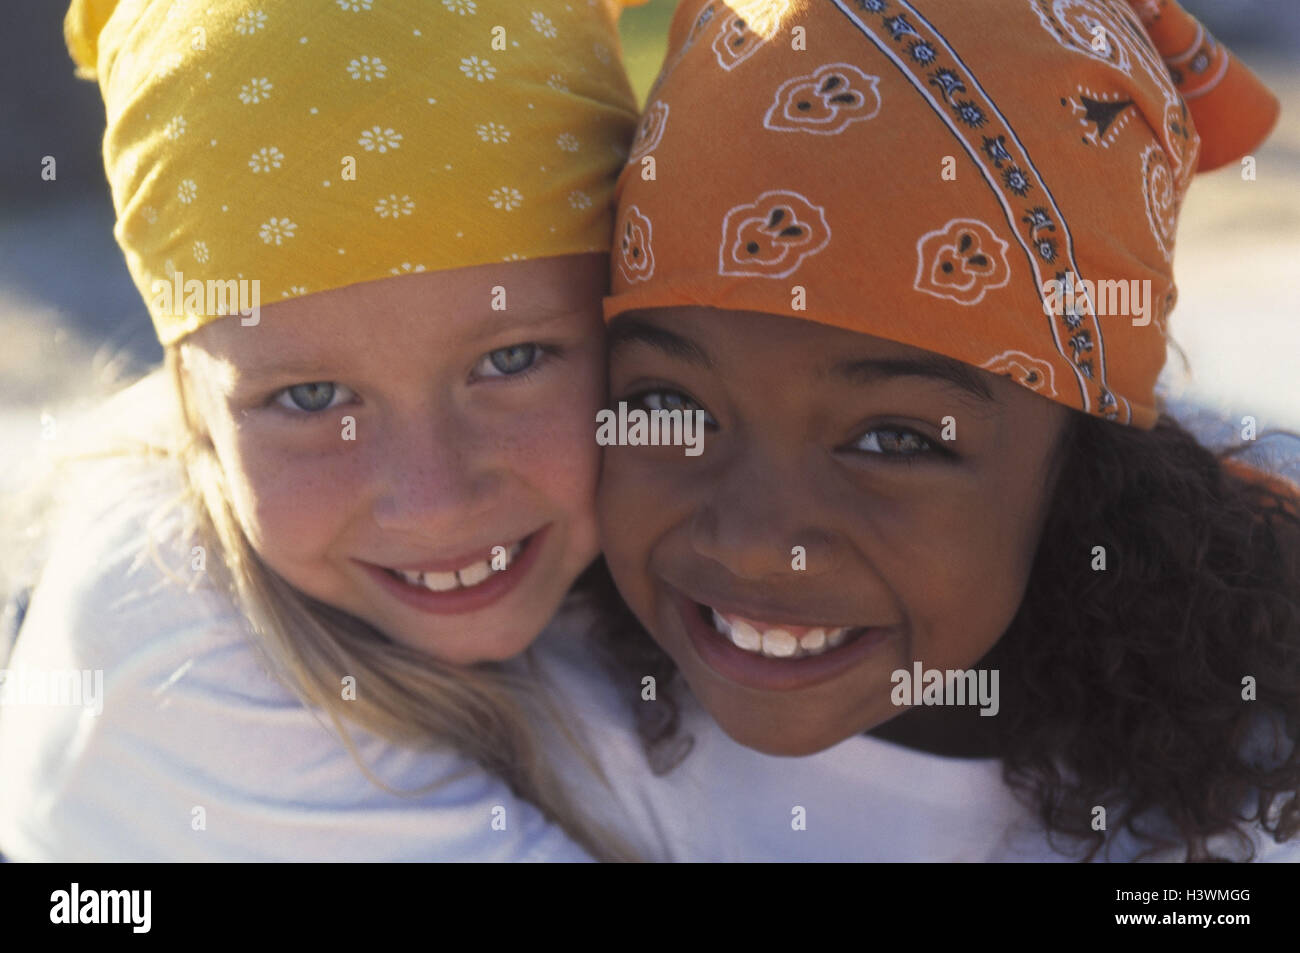 Girls, different colour of skin, headscarfs, laugh, embrace embrace, portrait, friends, friendship, friends, nationality, differently, non-whites, whiteness, children, blond, dark-haired, childhood, fun, cohesion, together, trust, suture, fun, happy, view Stock Photo